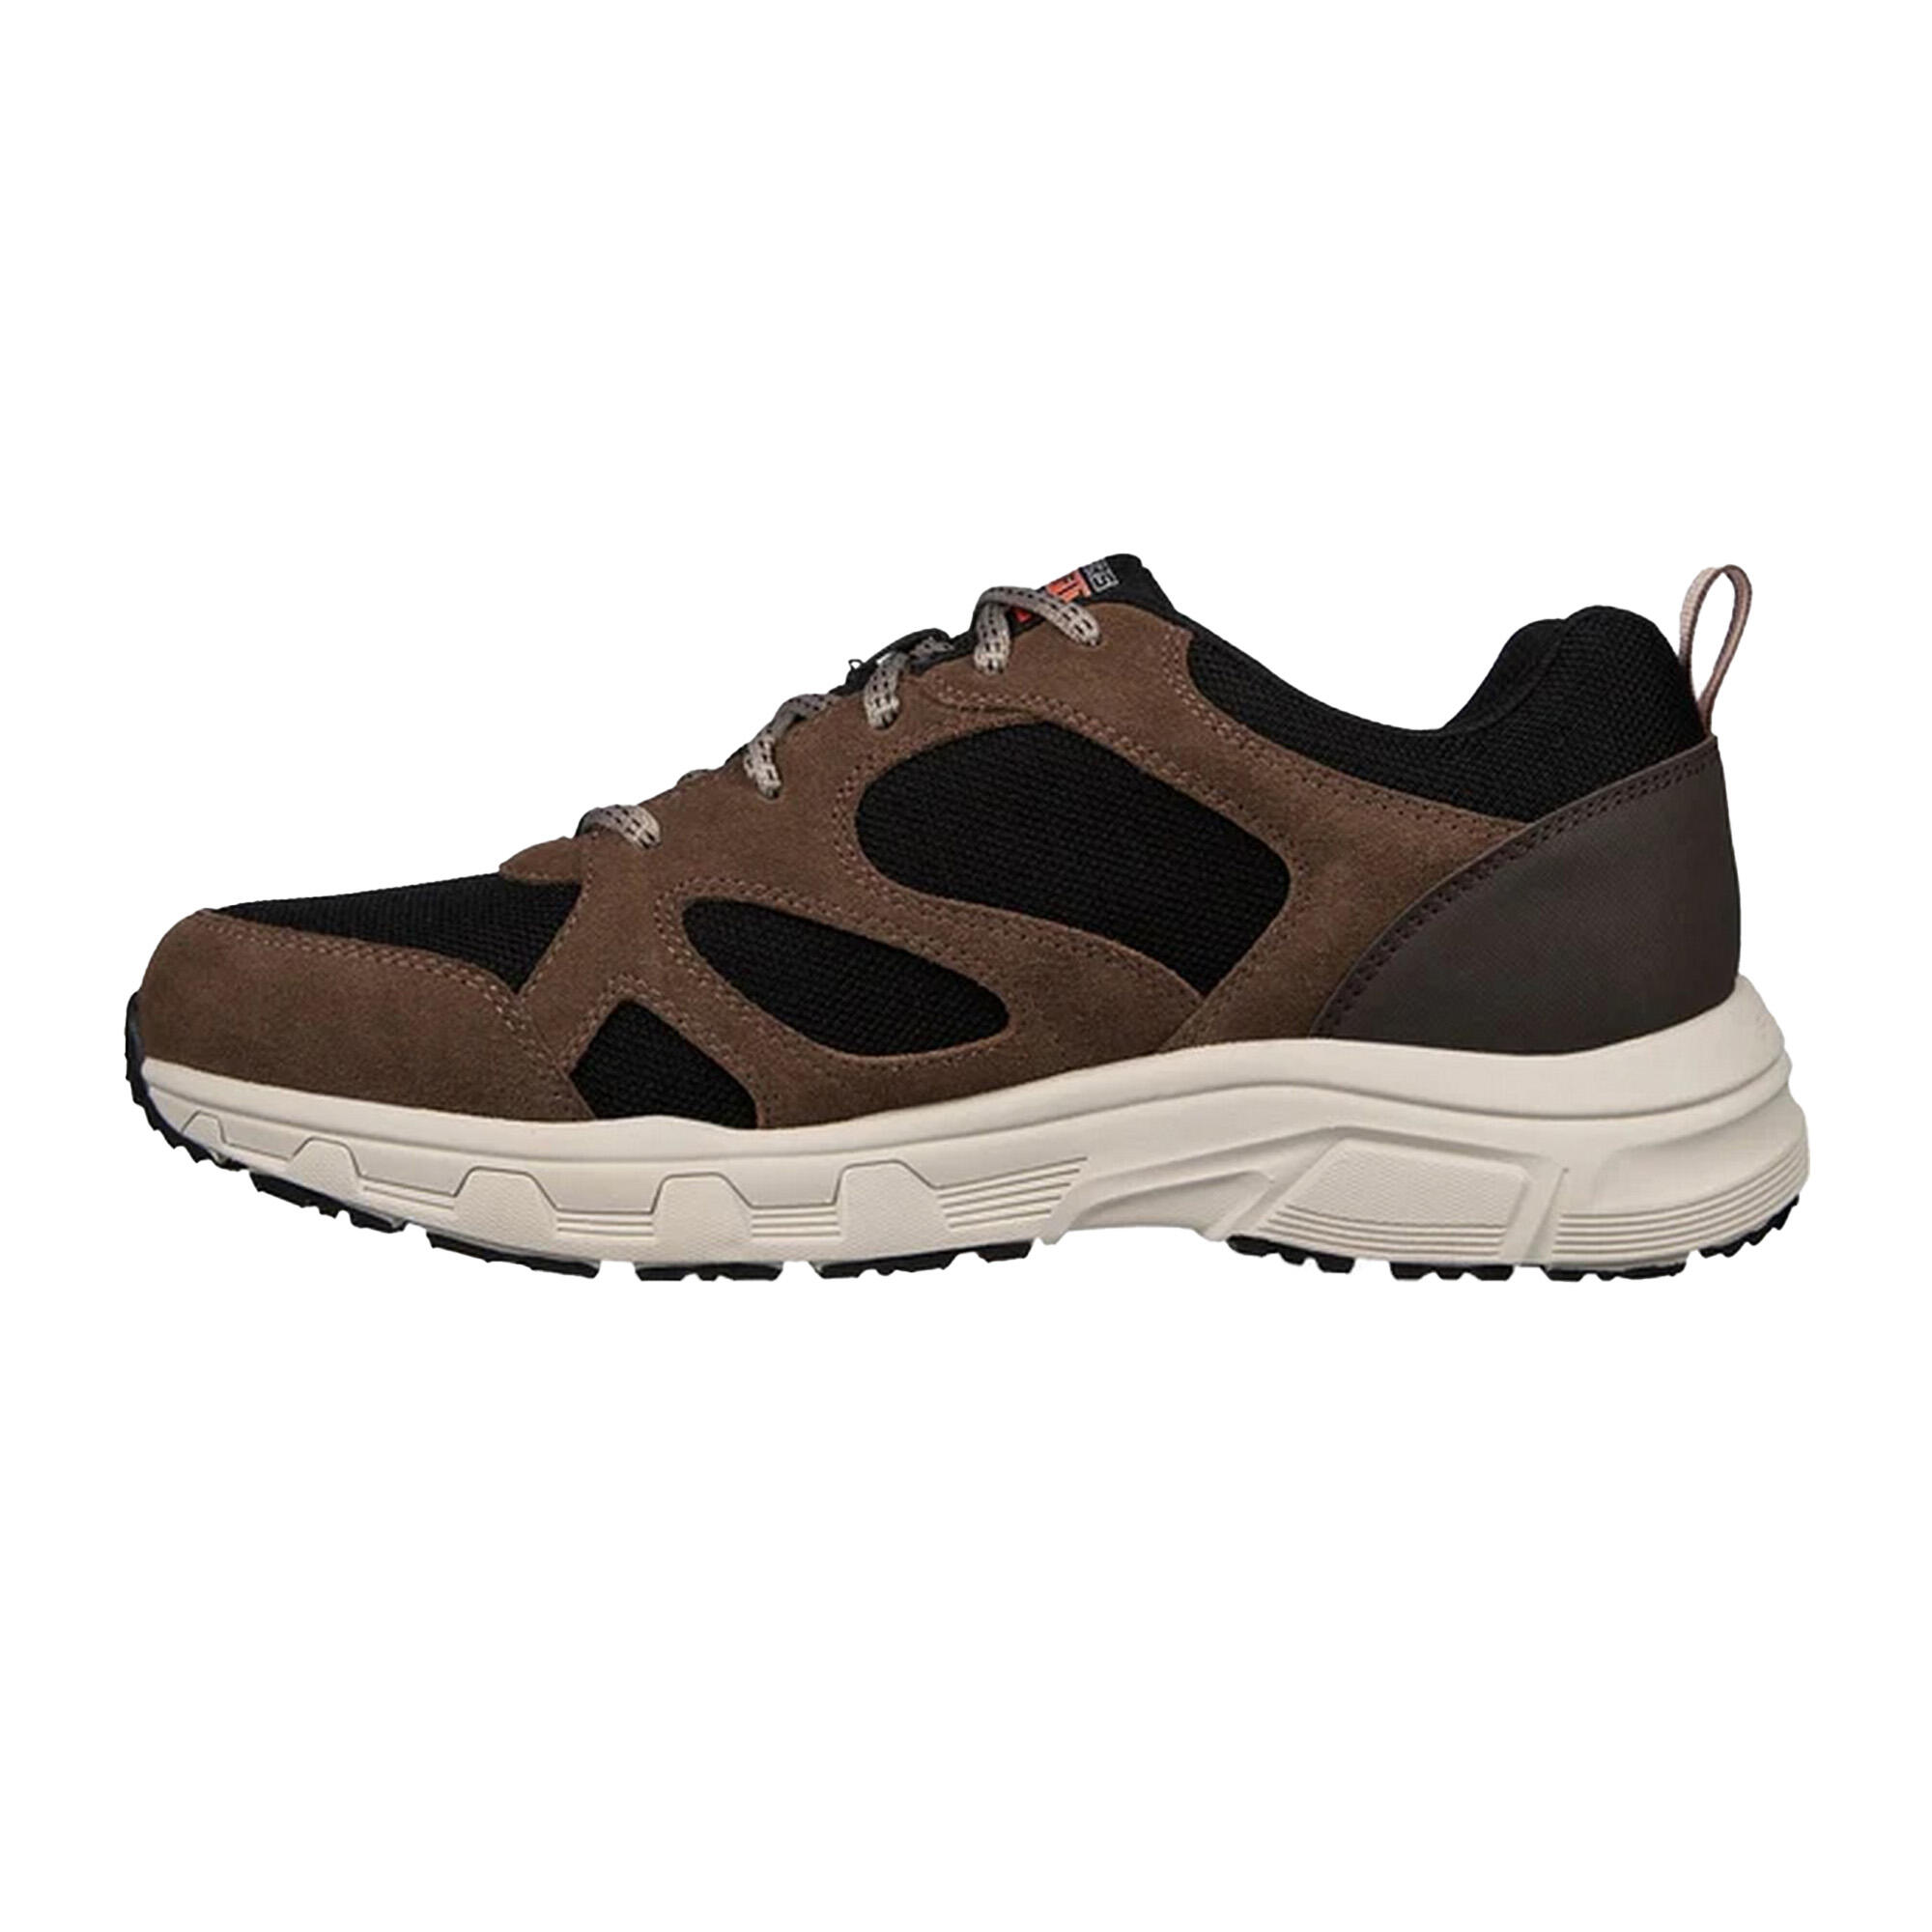 Mens Oak Canyon Sunfair Suede Relaxed Fit Trainers (Brown/Black) 2/5